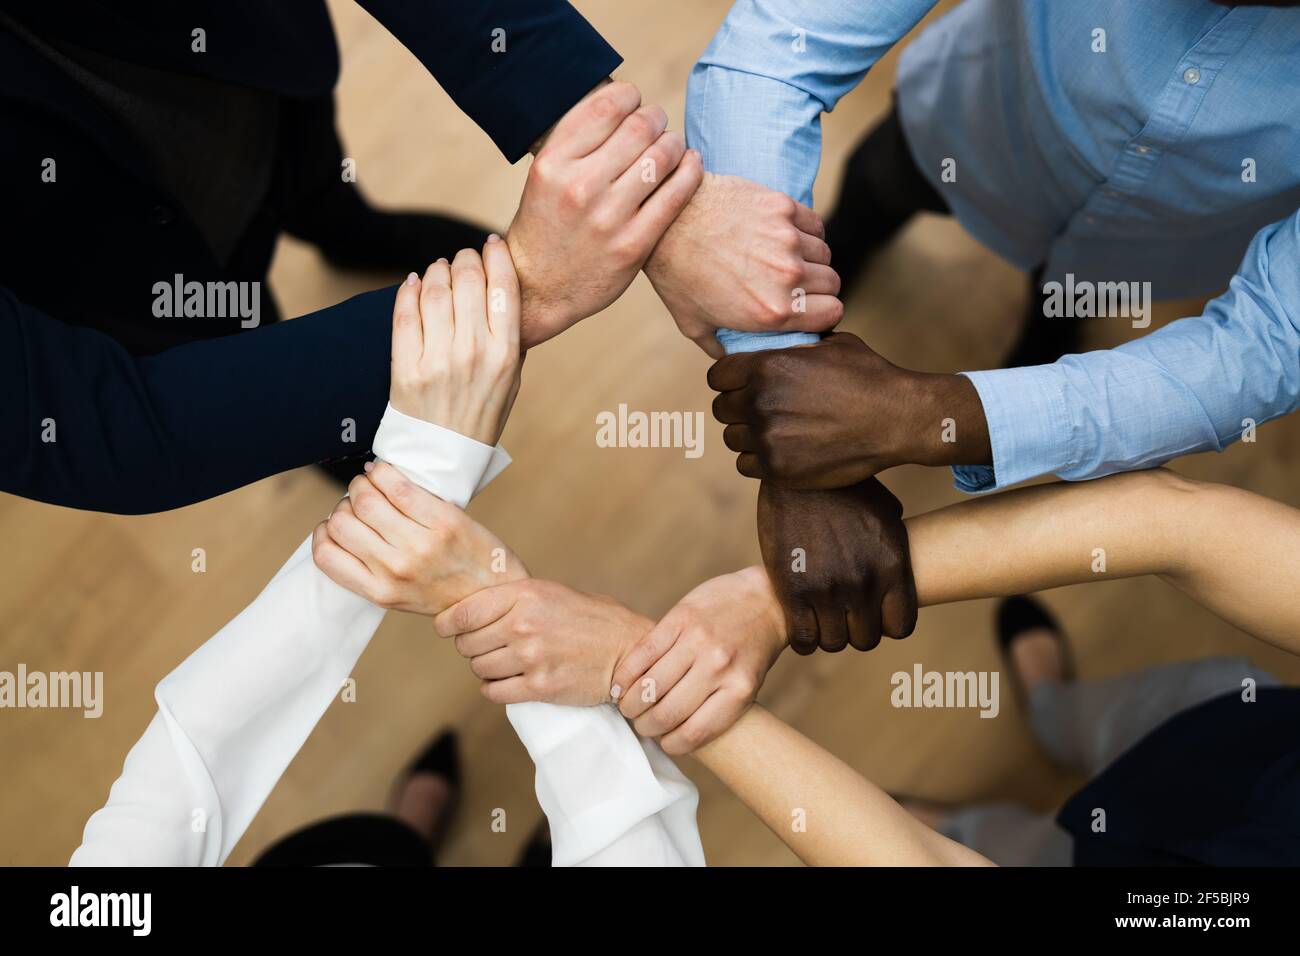 Group Of Business People Commitment And Support Concept Stock Photo